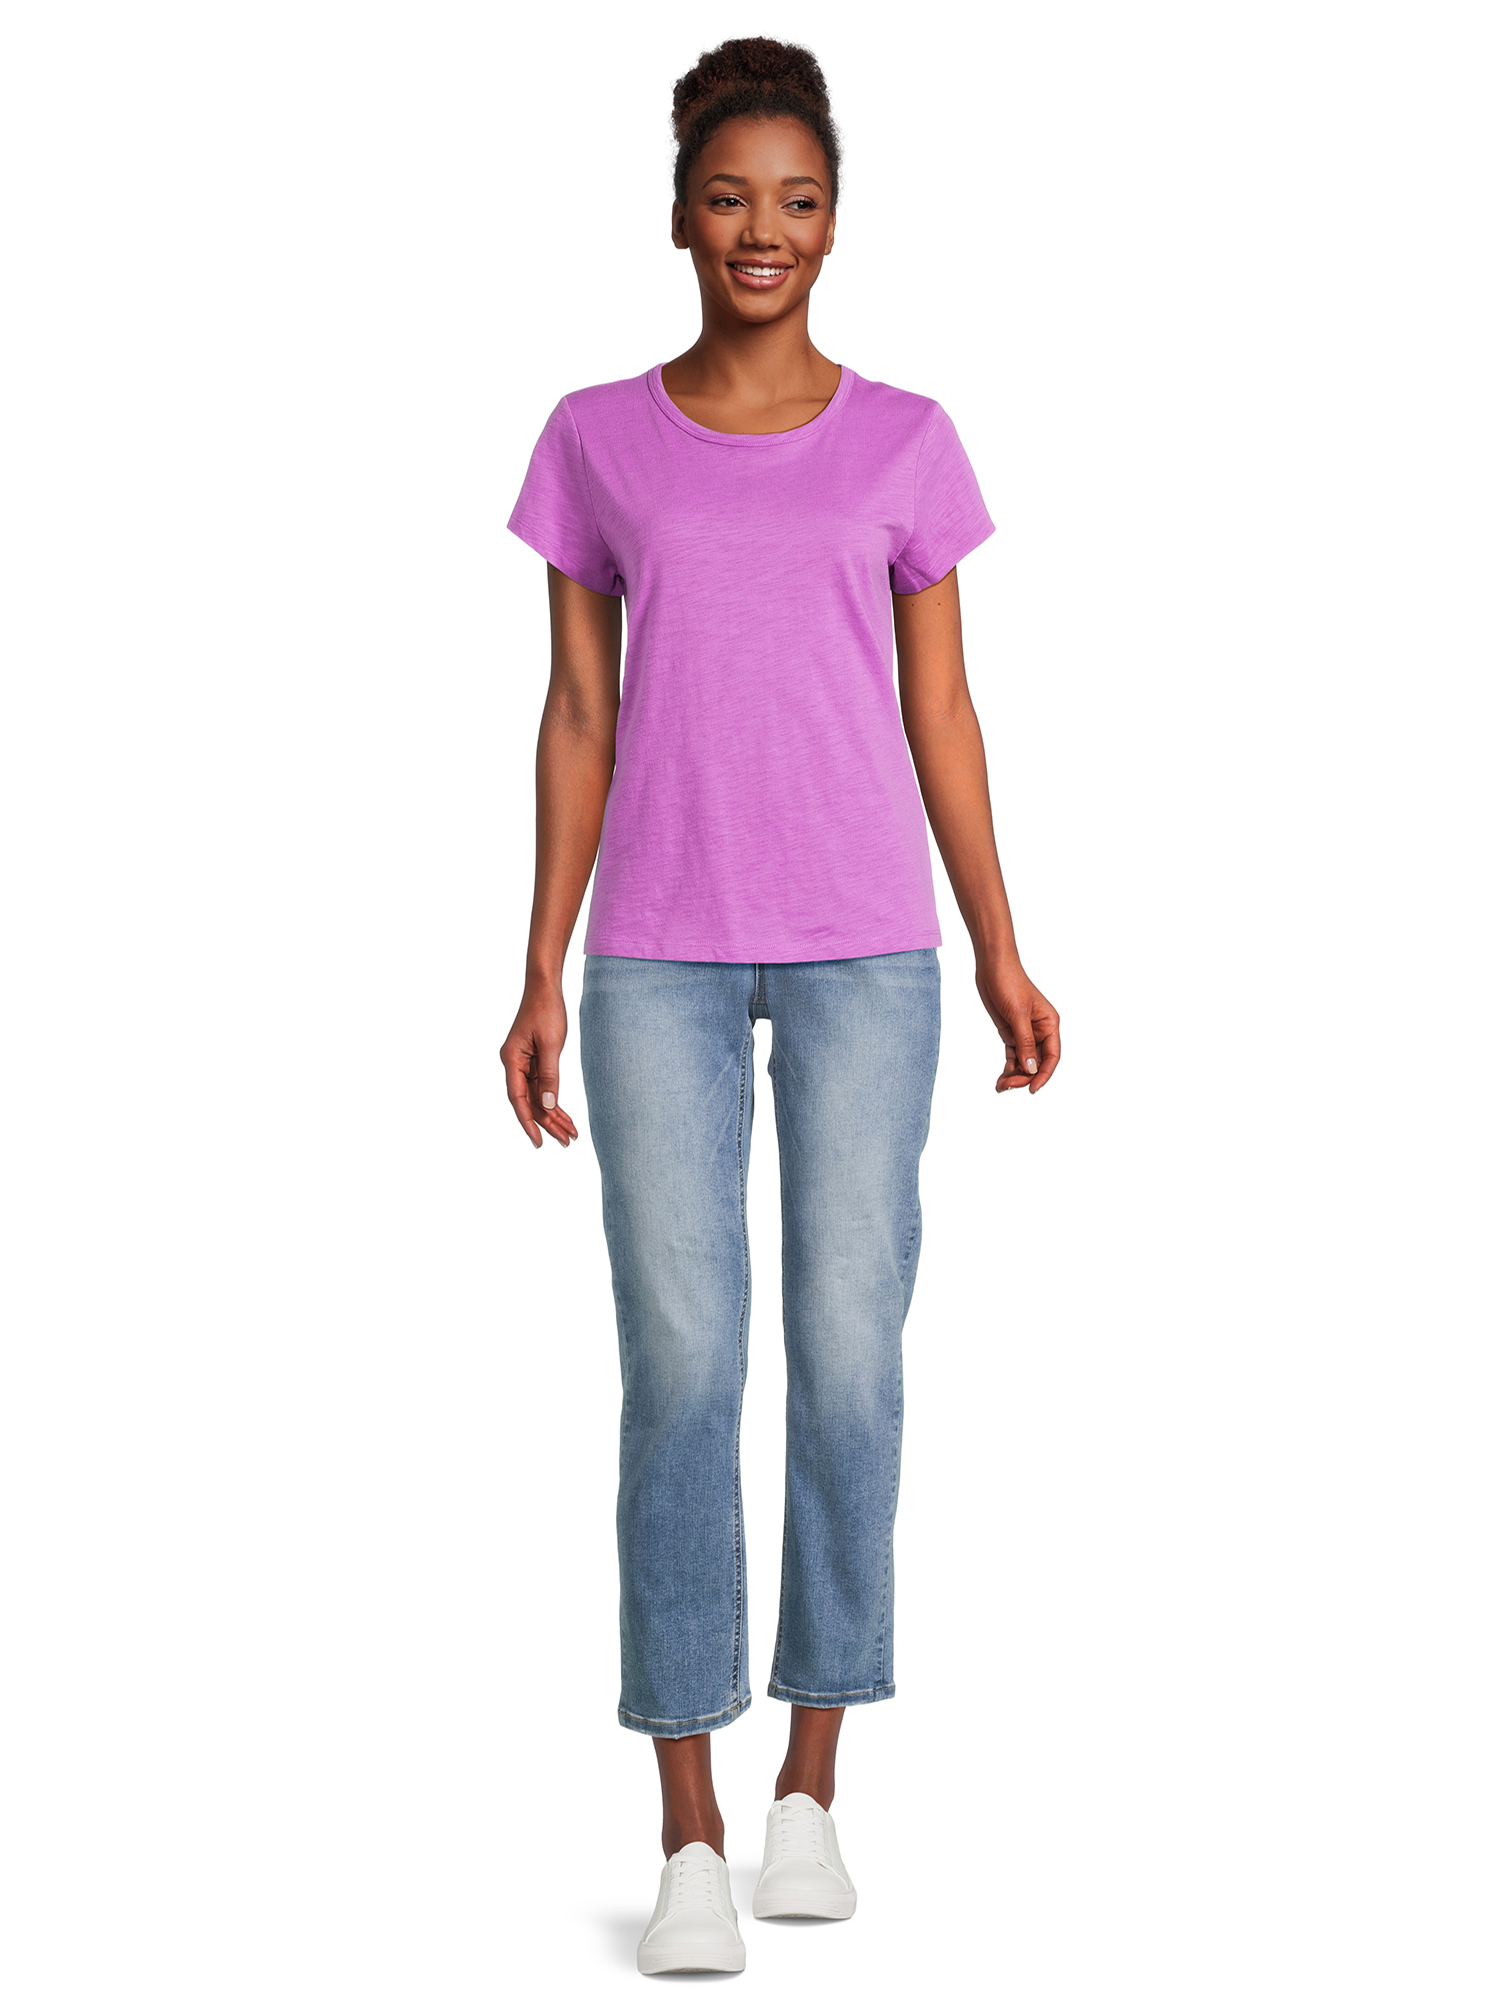 Time and Tru Women's Slub Texture Tee with Short Sleeves, Sizes S-XXXL - image 4 of 6